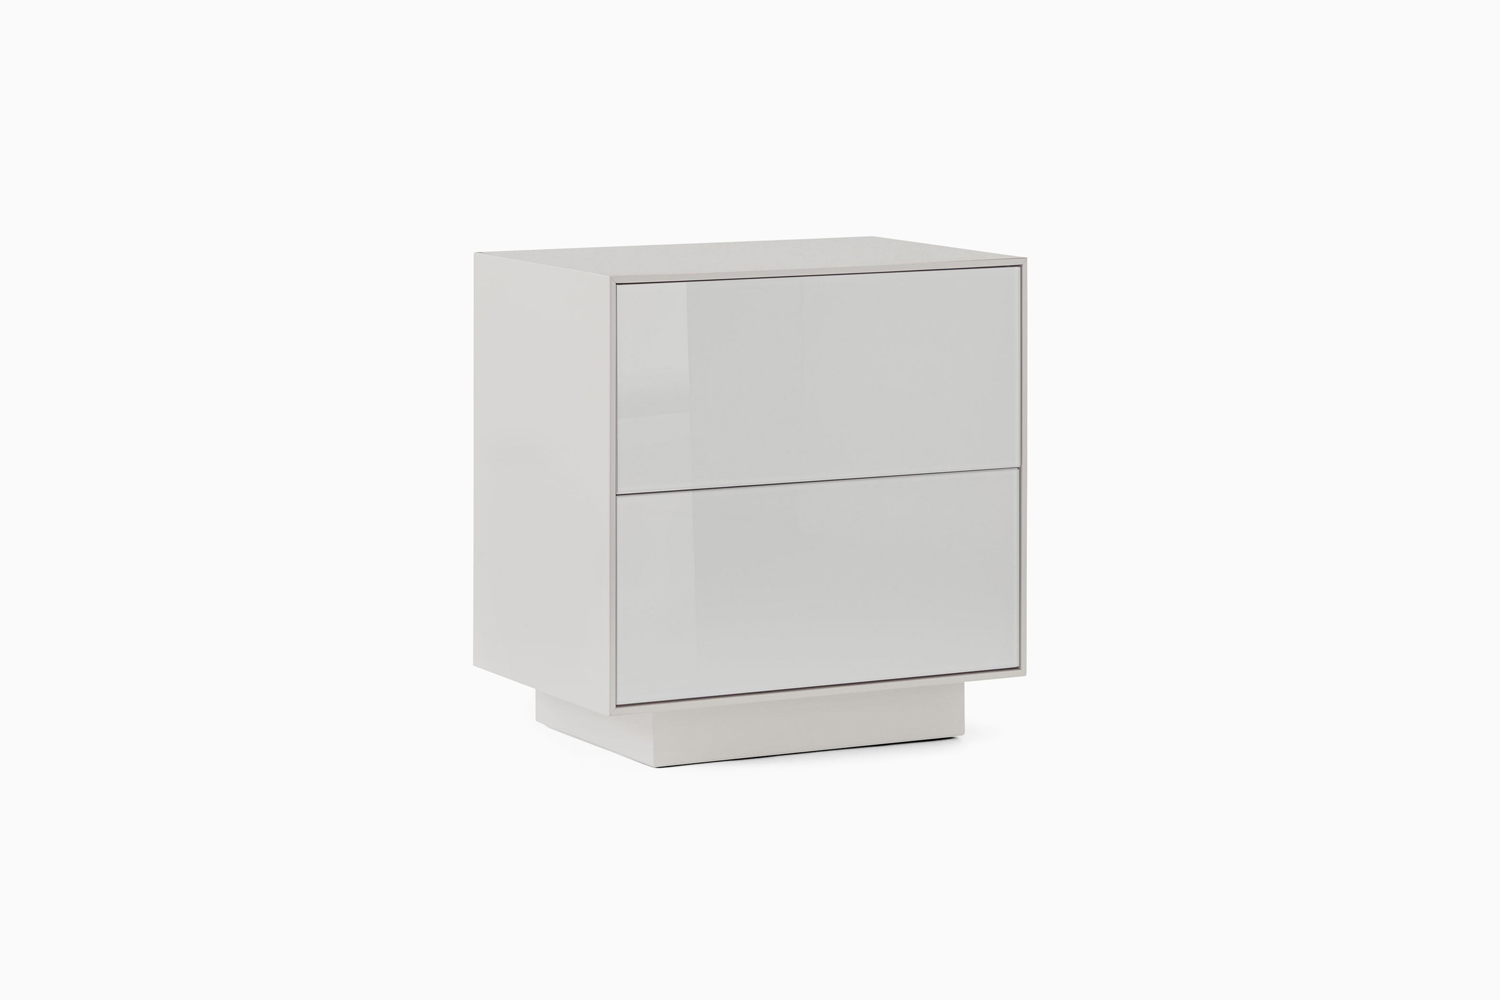 the emilia nightstand is \$549 at west elm. 23